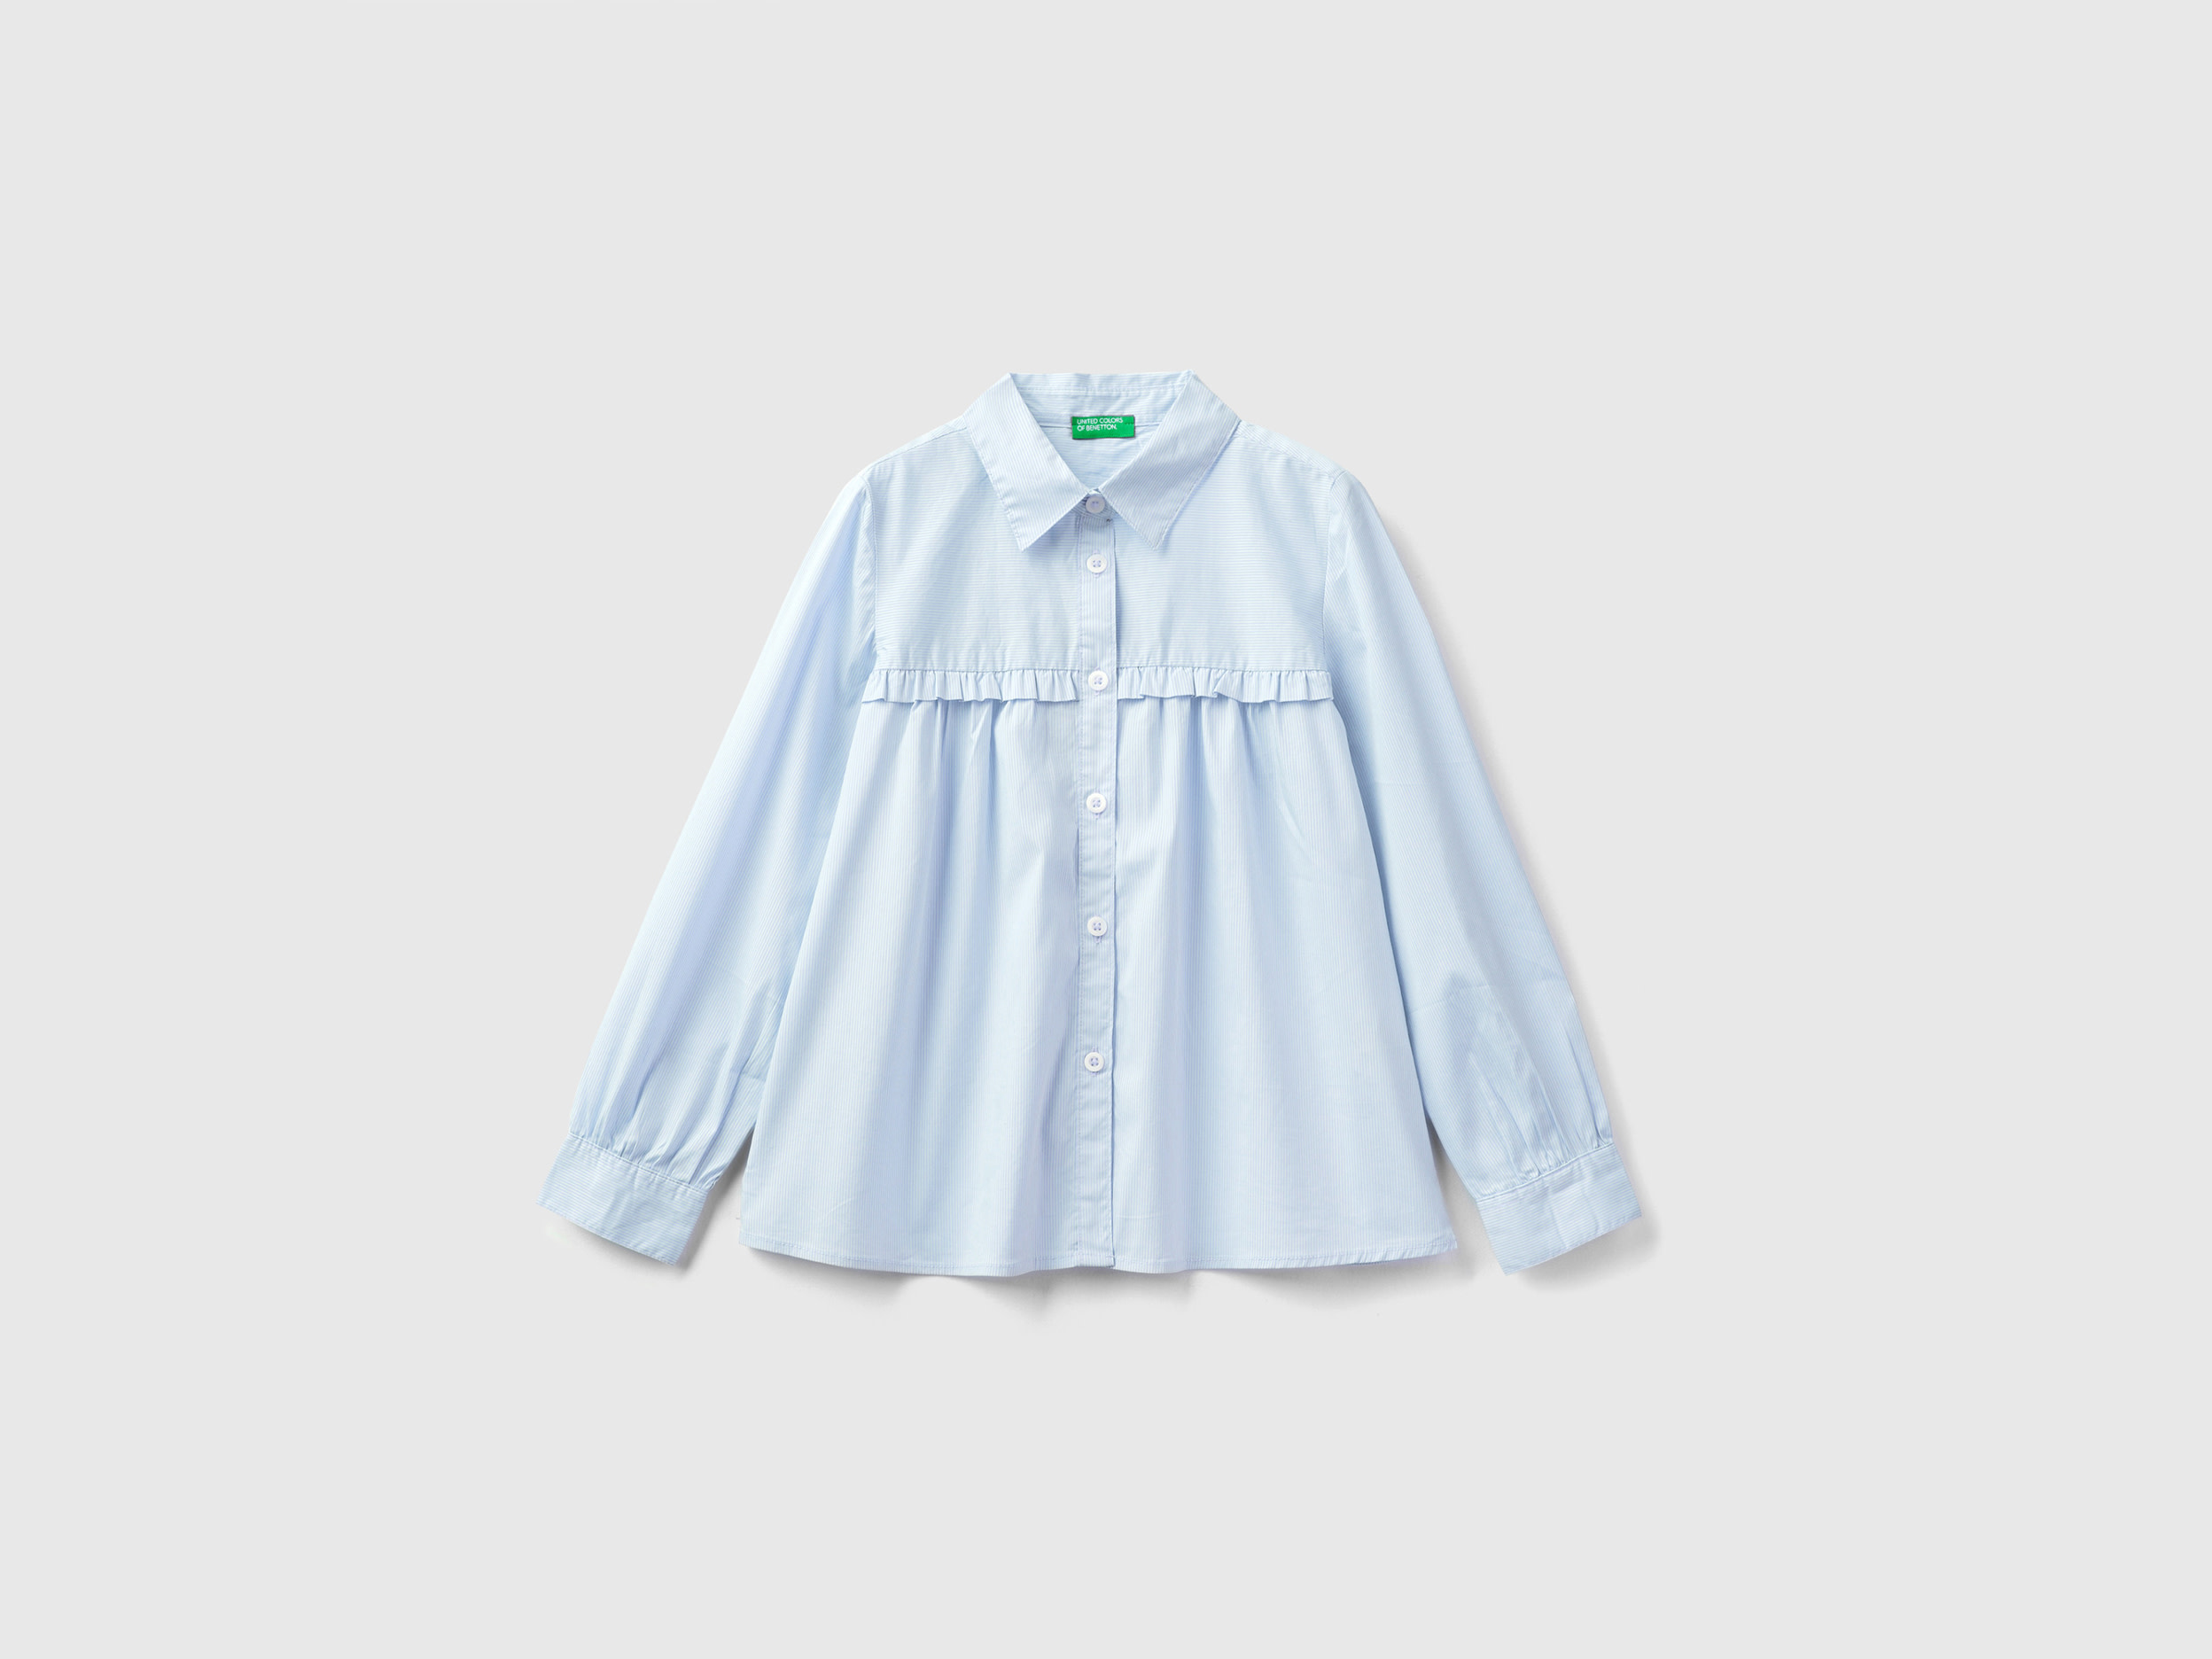 Benetton, Shirt With Rouches On The Yoke, size L, Sky Blue, Kids